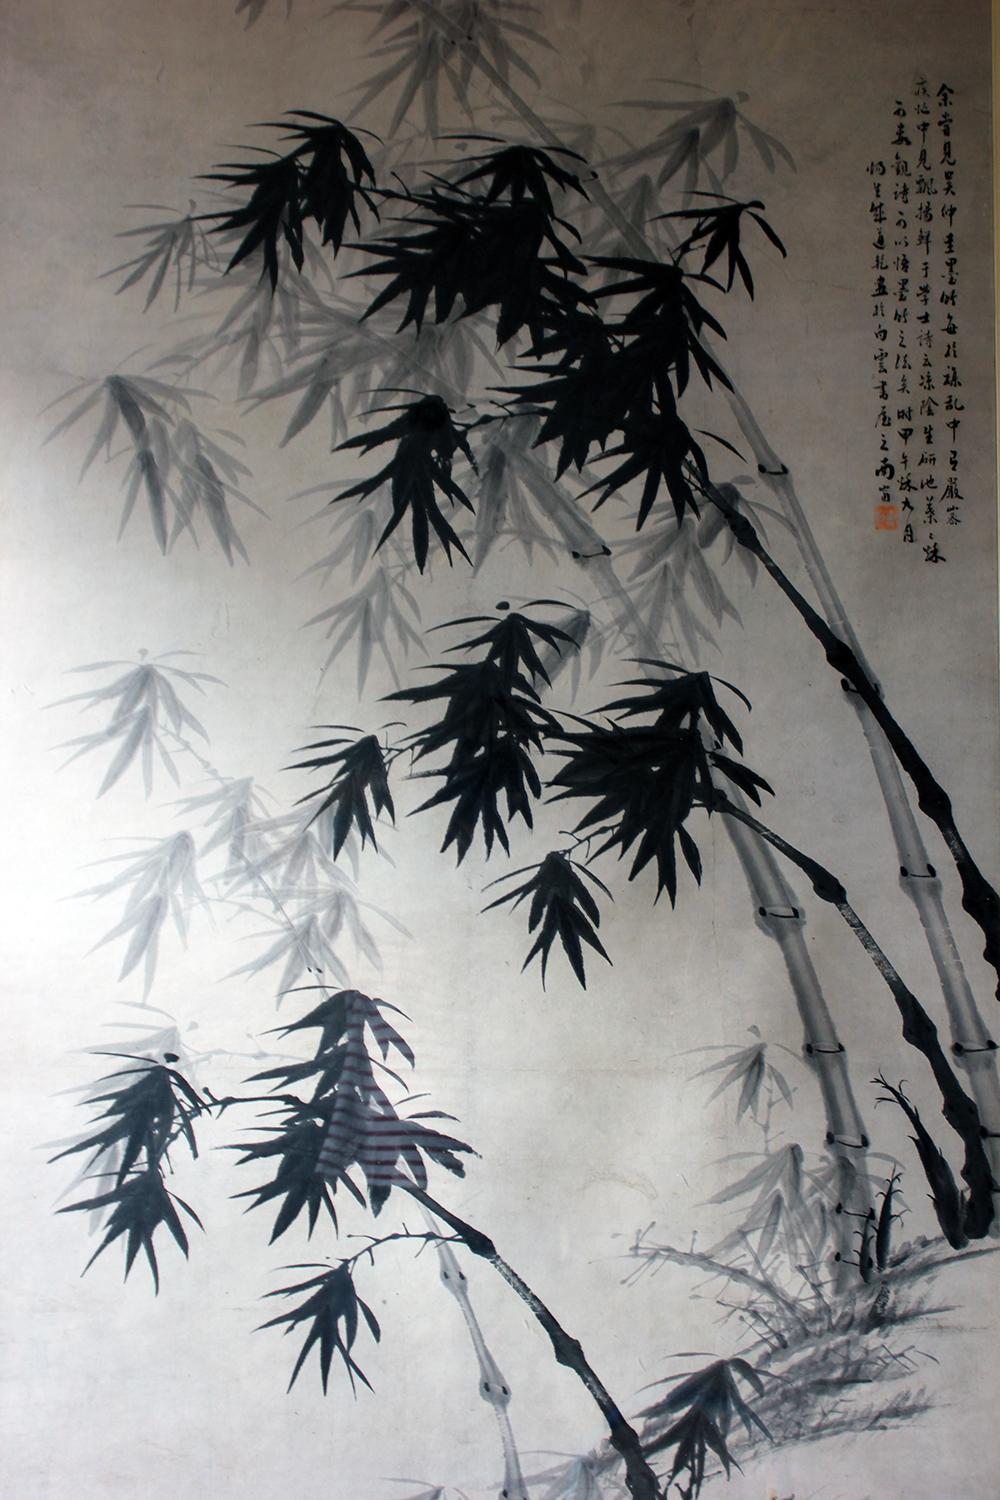 After 董其昌 Dong Qichang, Very Large Chinese Ink Painting of Bamboo, circa 1920-40 8